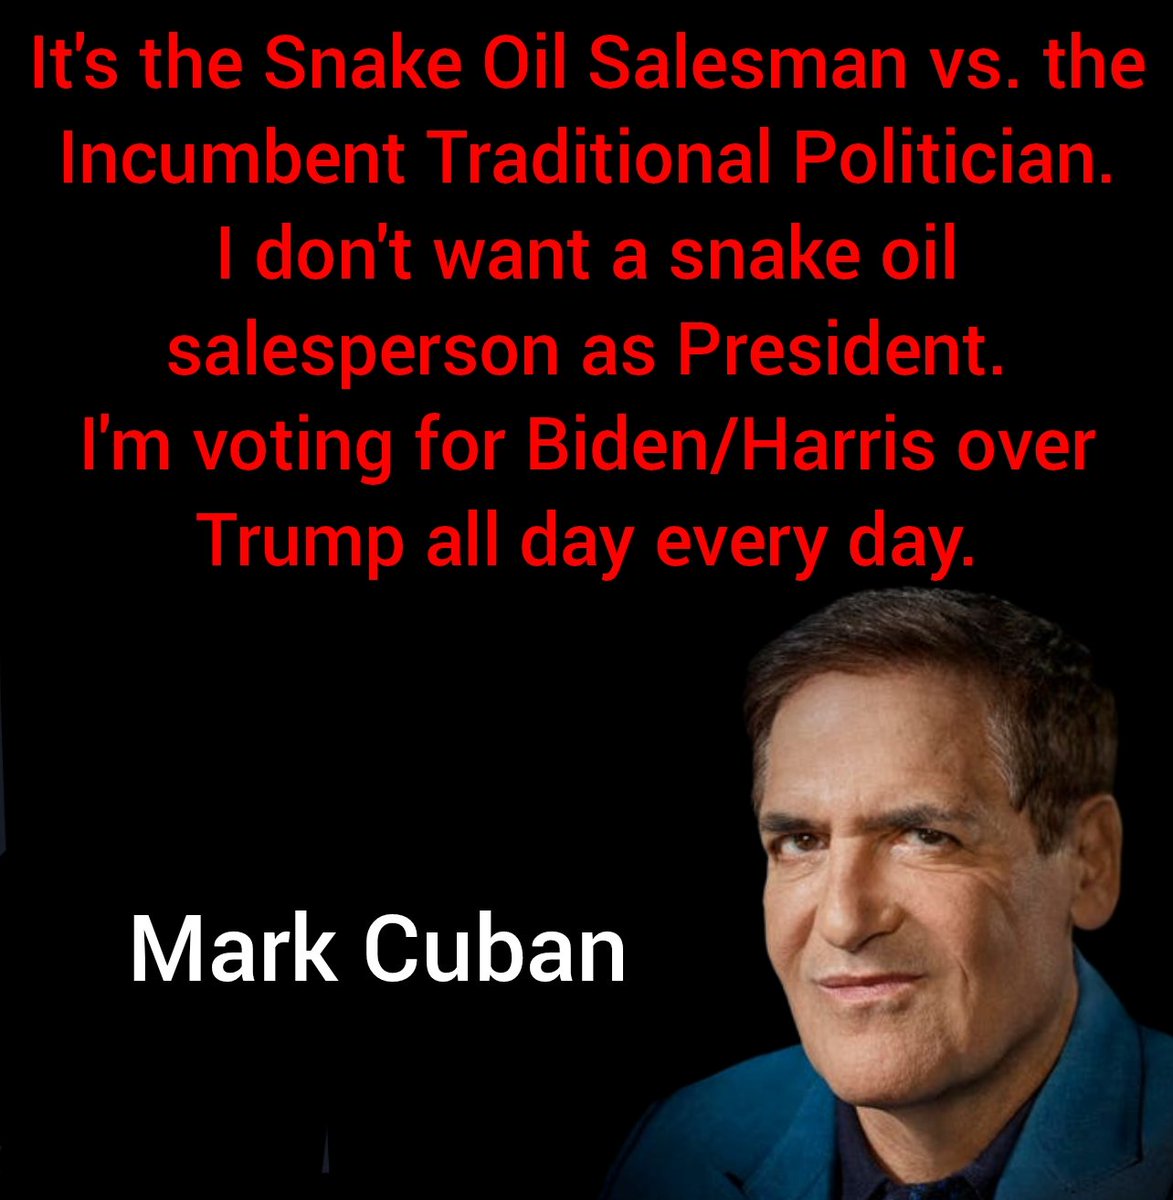 If you agree with Mark Cuban, then leave a 💙 and retweet